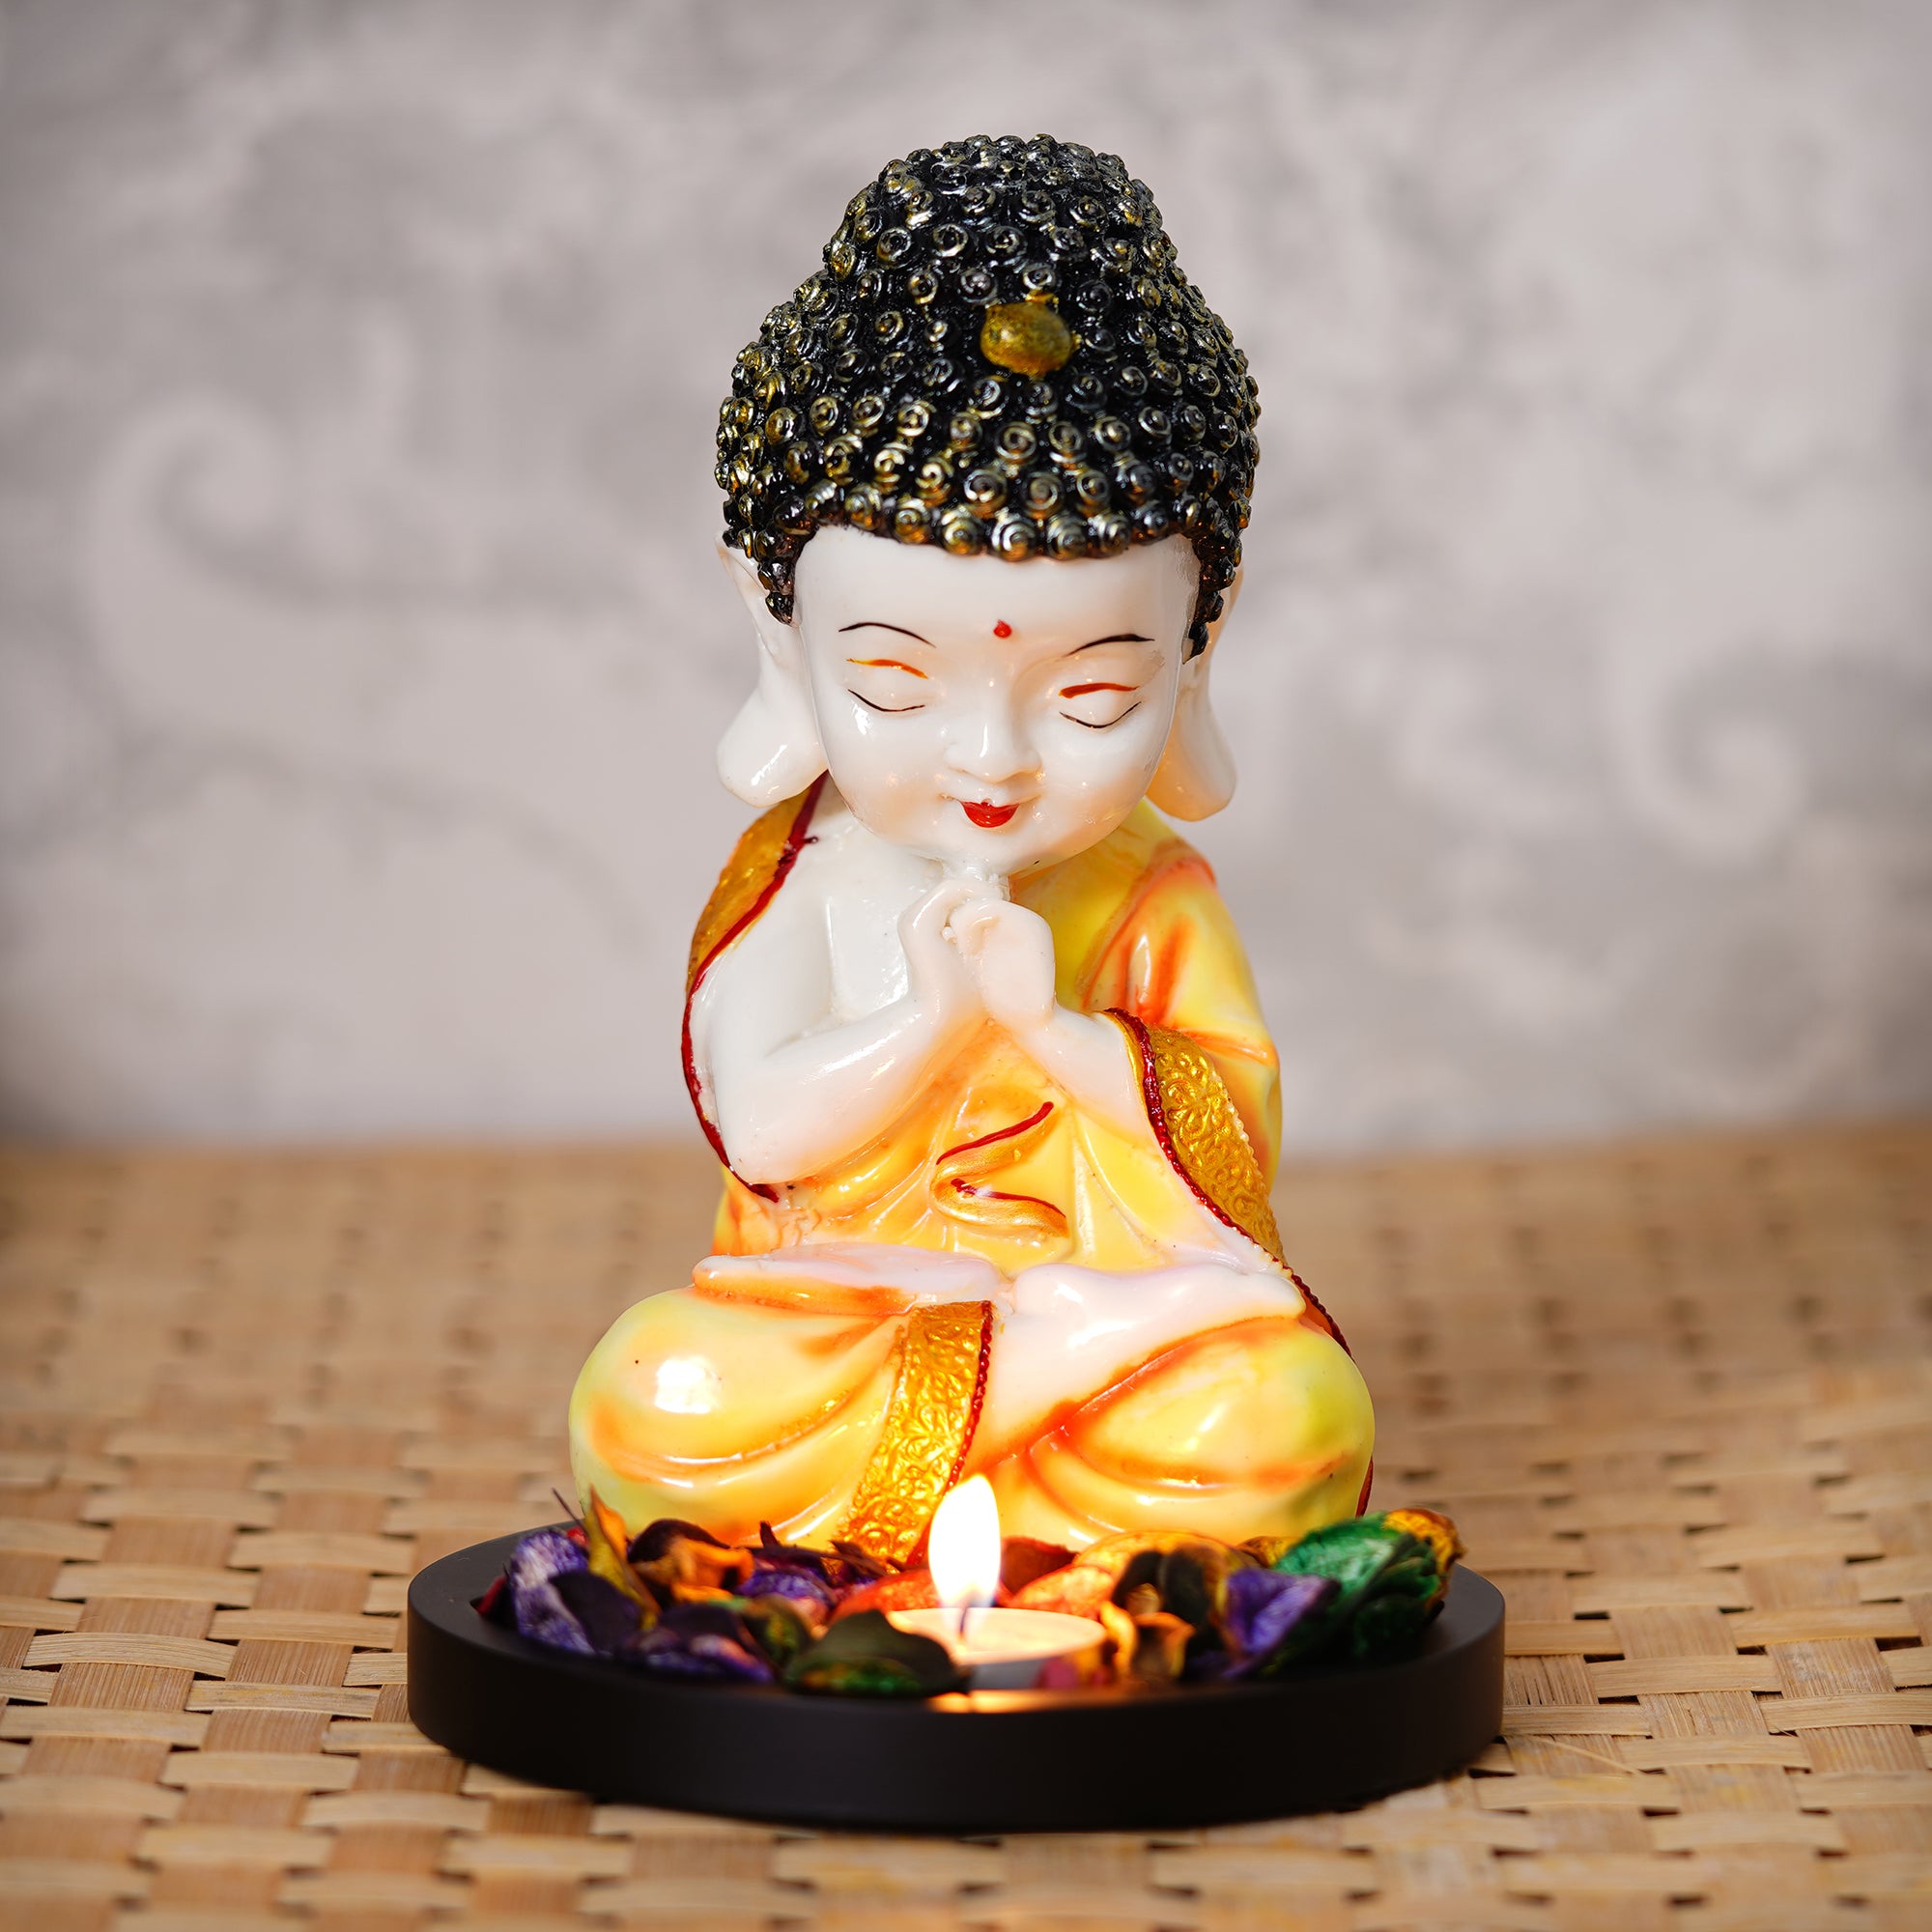 Polyresin Yellow and White Praying Monk Buddha Idol with Wooden Base, Fragranced Petals and Tealight